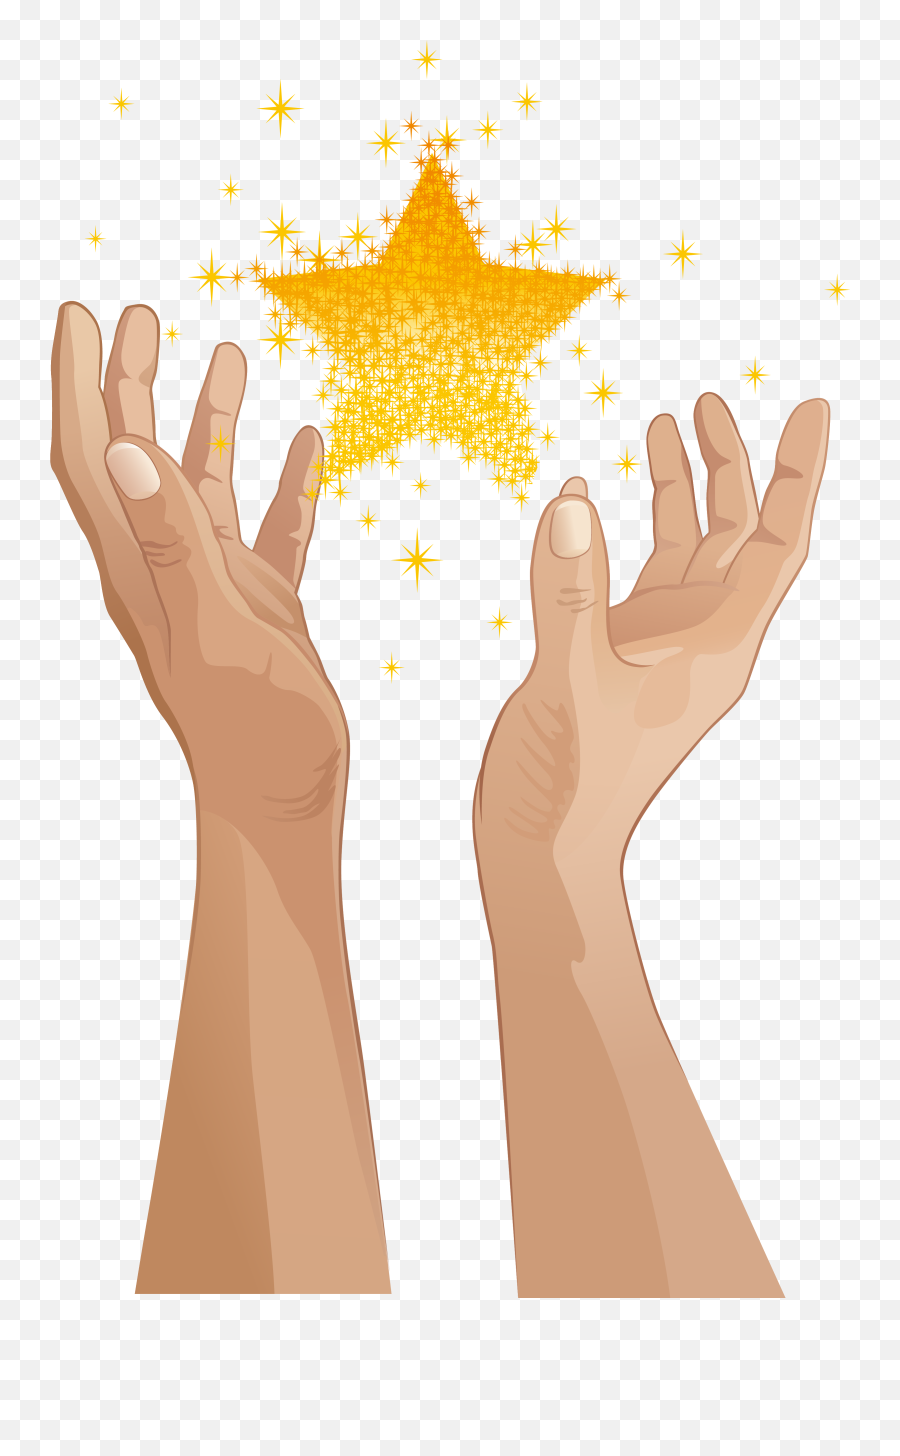 Reaching Hand Png - Star In Hand Vector Full Size Png Transparent Background Reach For The Stars Clipart Emoji,Hand Grabbing Png